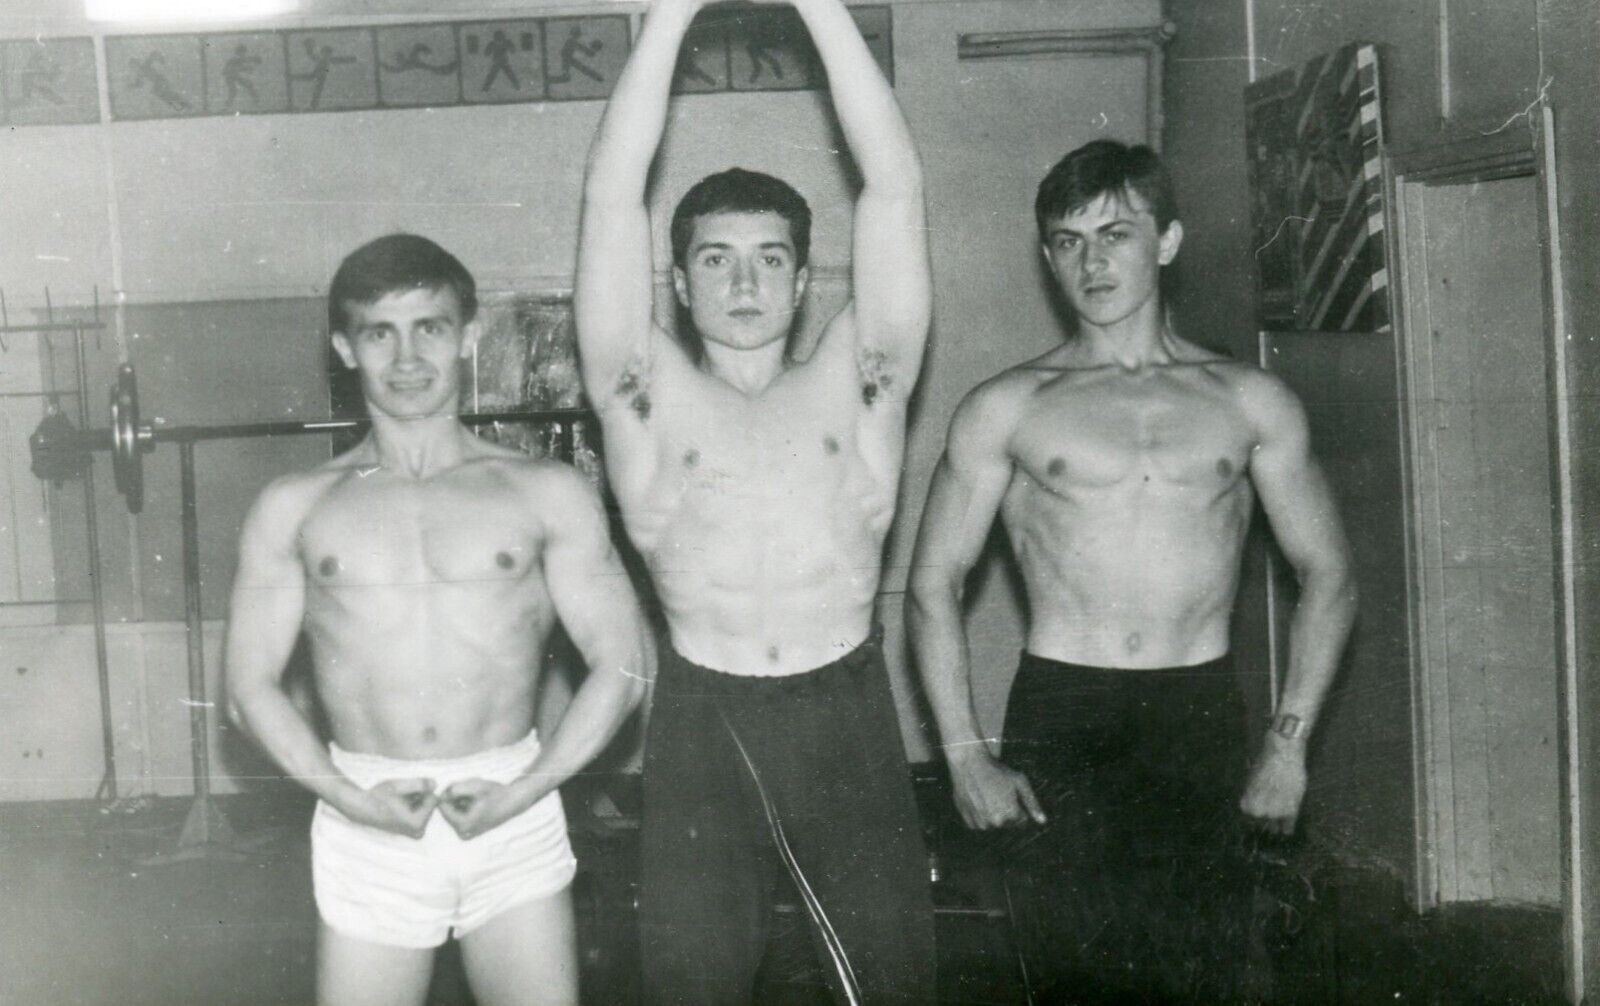 Shirtless Handsome young men at gym bulge beach trunks gay int vtg photo